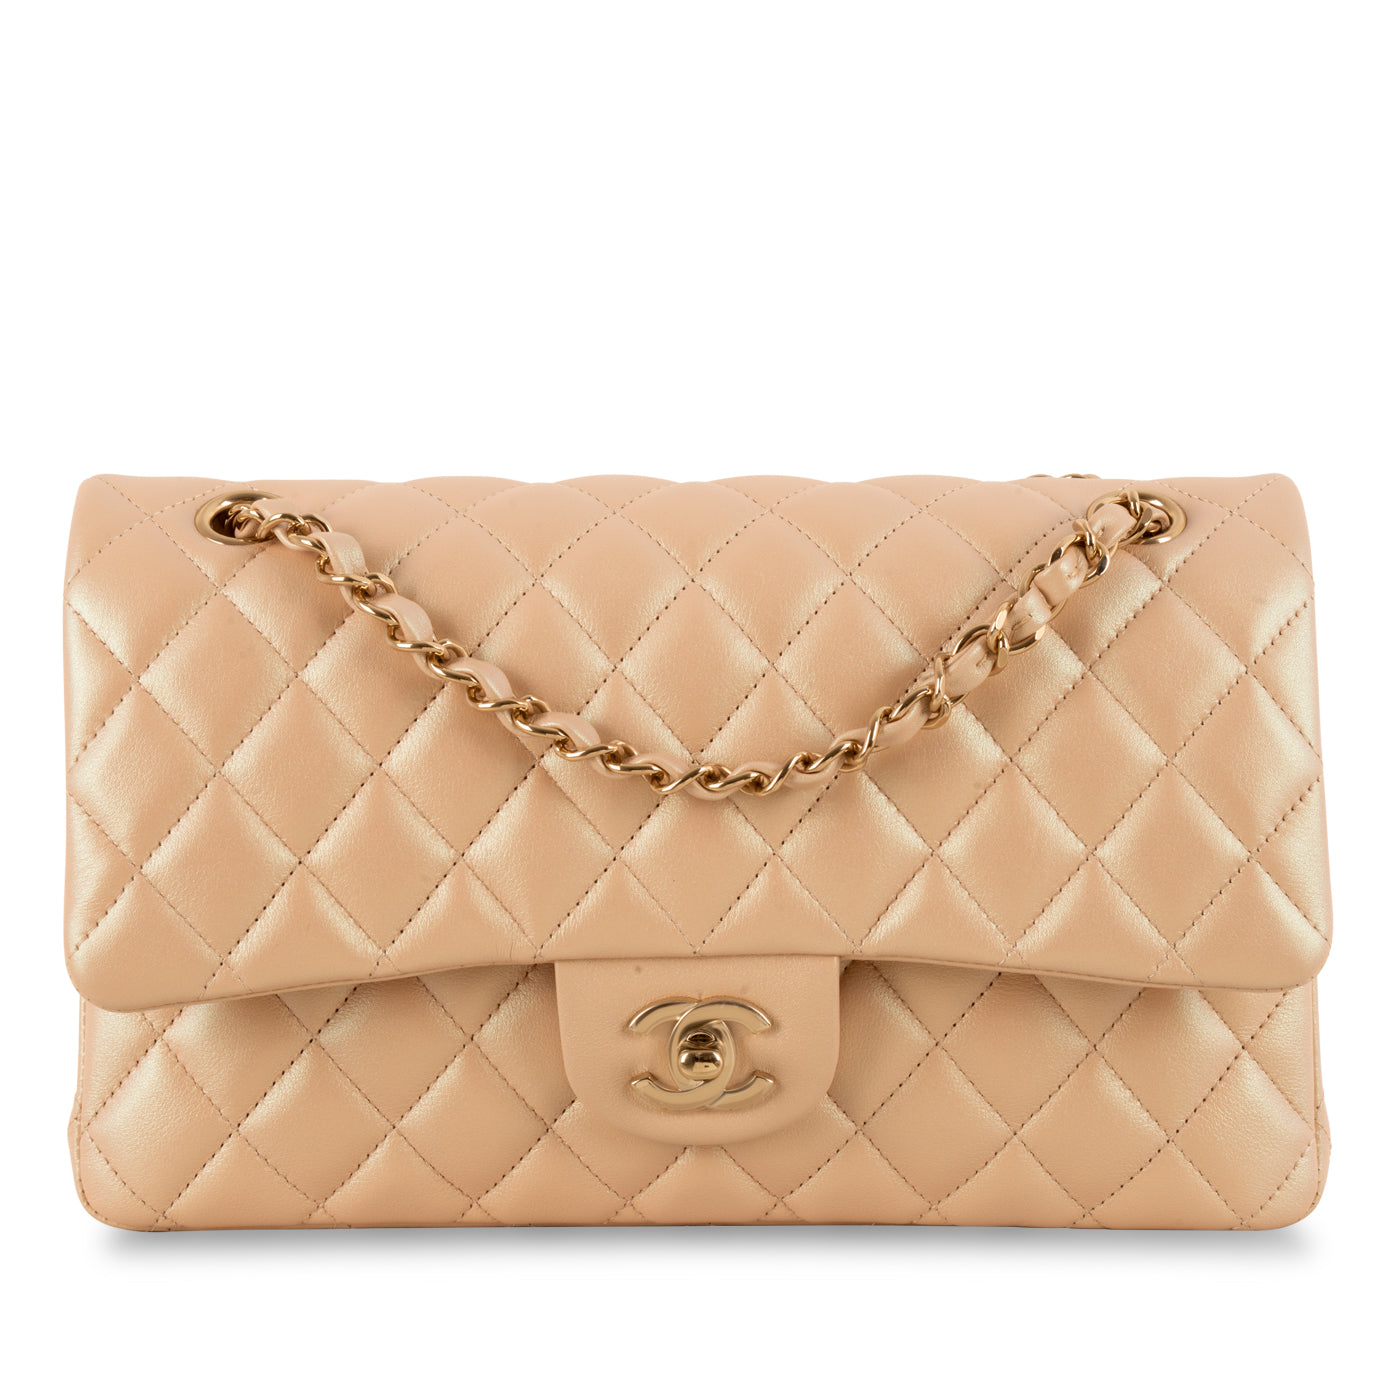 2022 Year CHANEL Classic Iridescent Lambskin Quilted Medium Double Fla